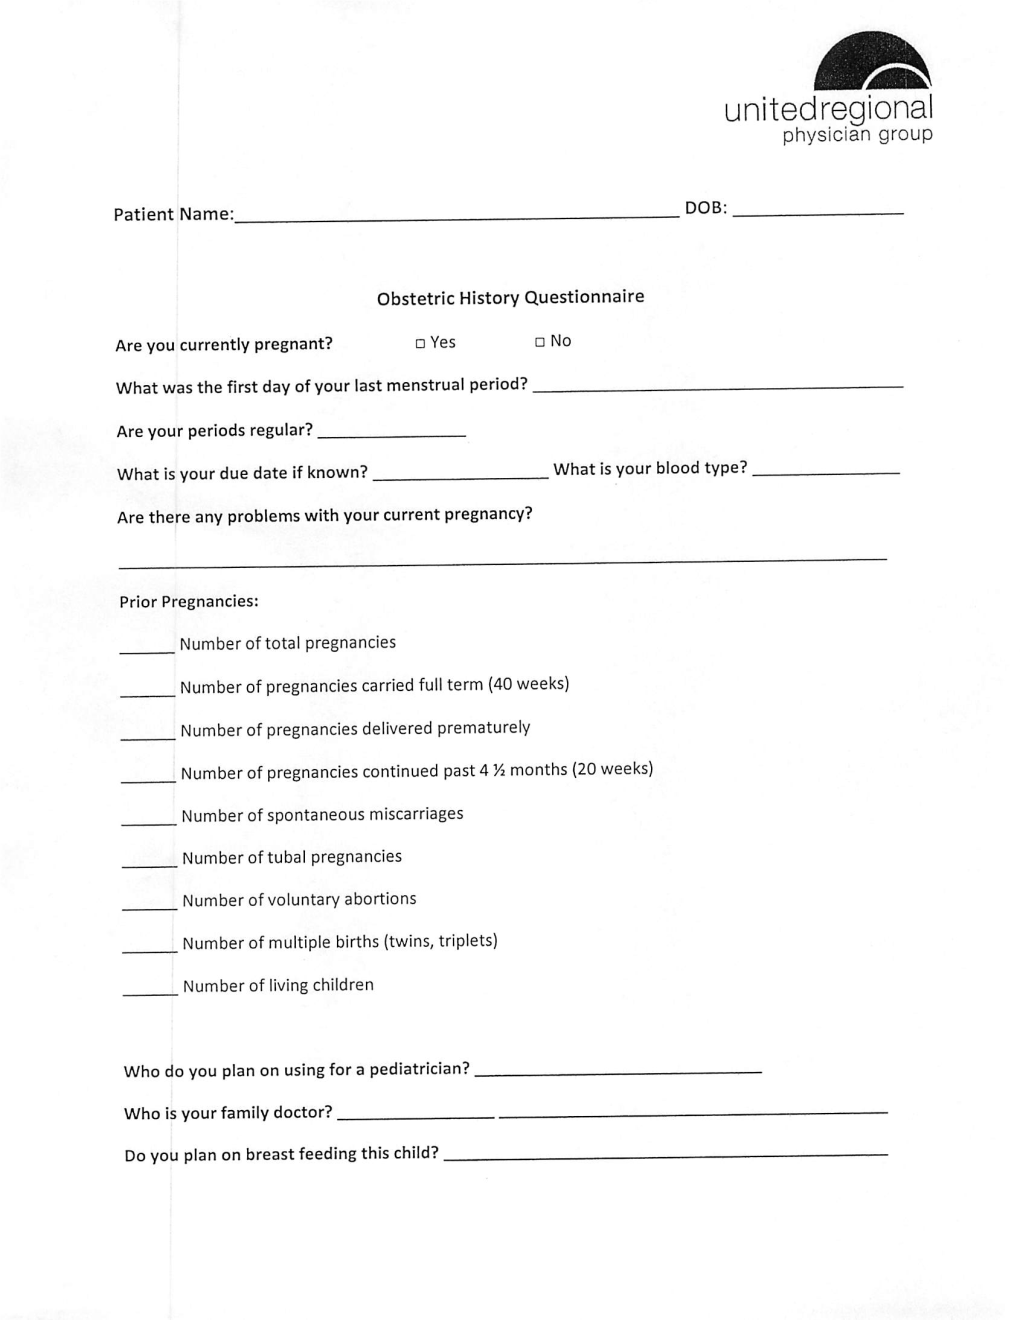 New Patient Form – Obstetrics